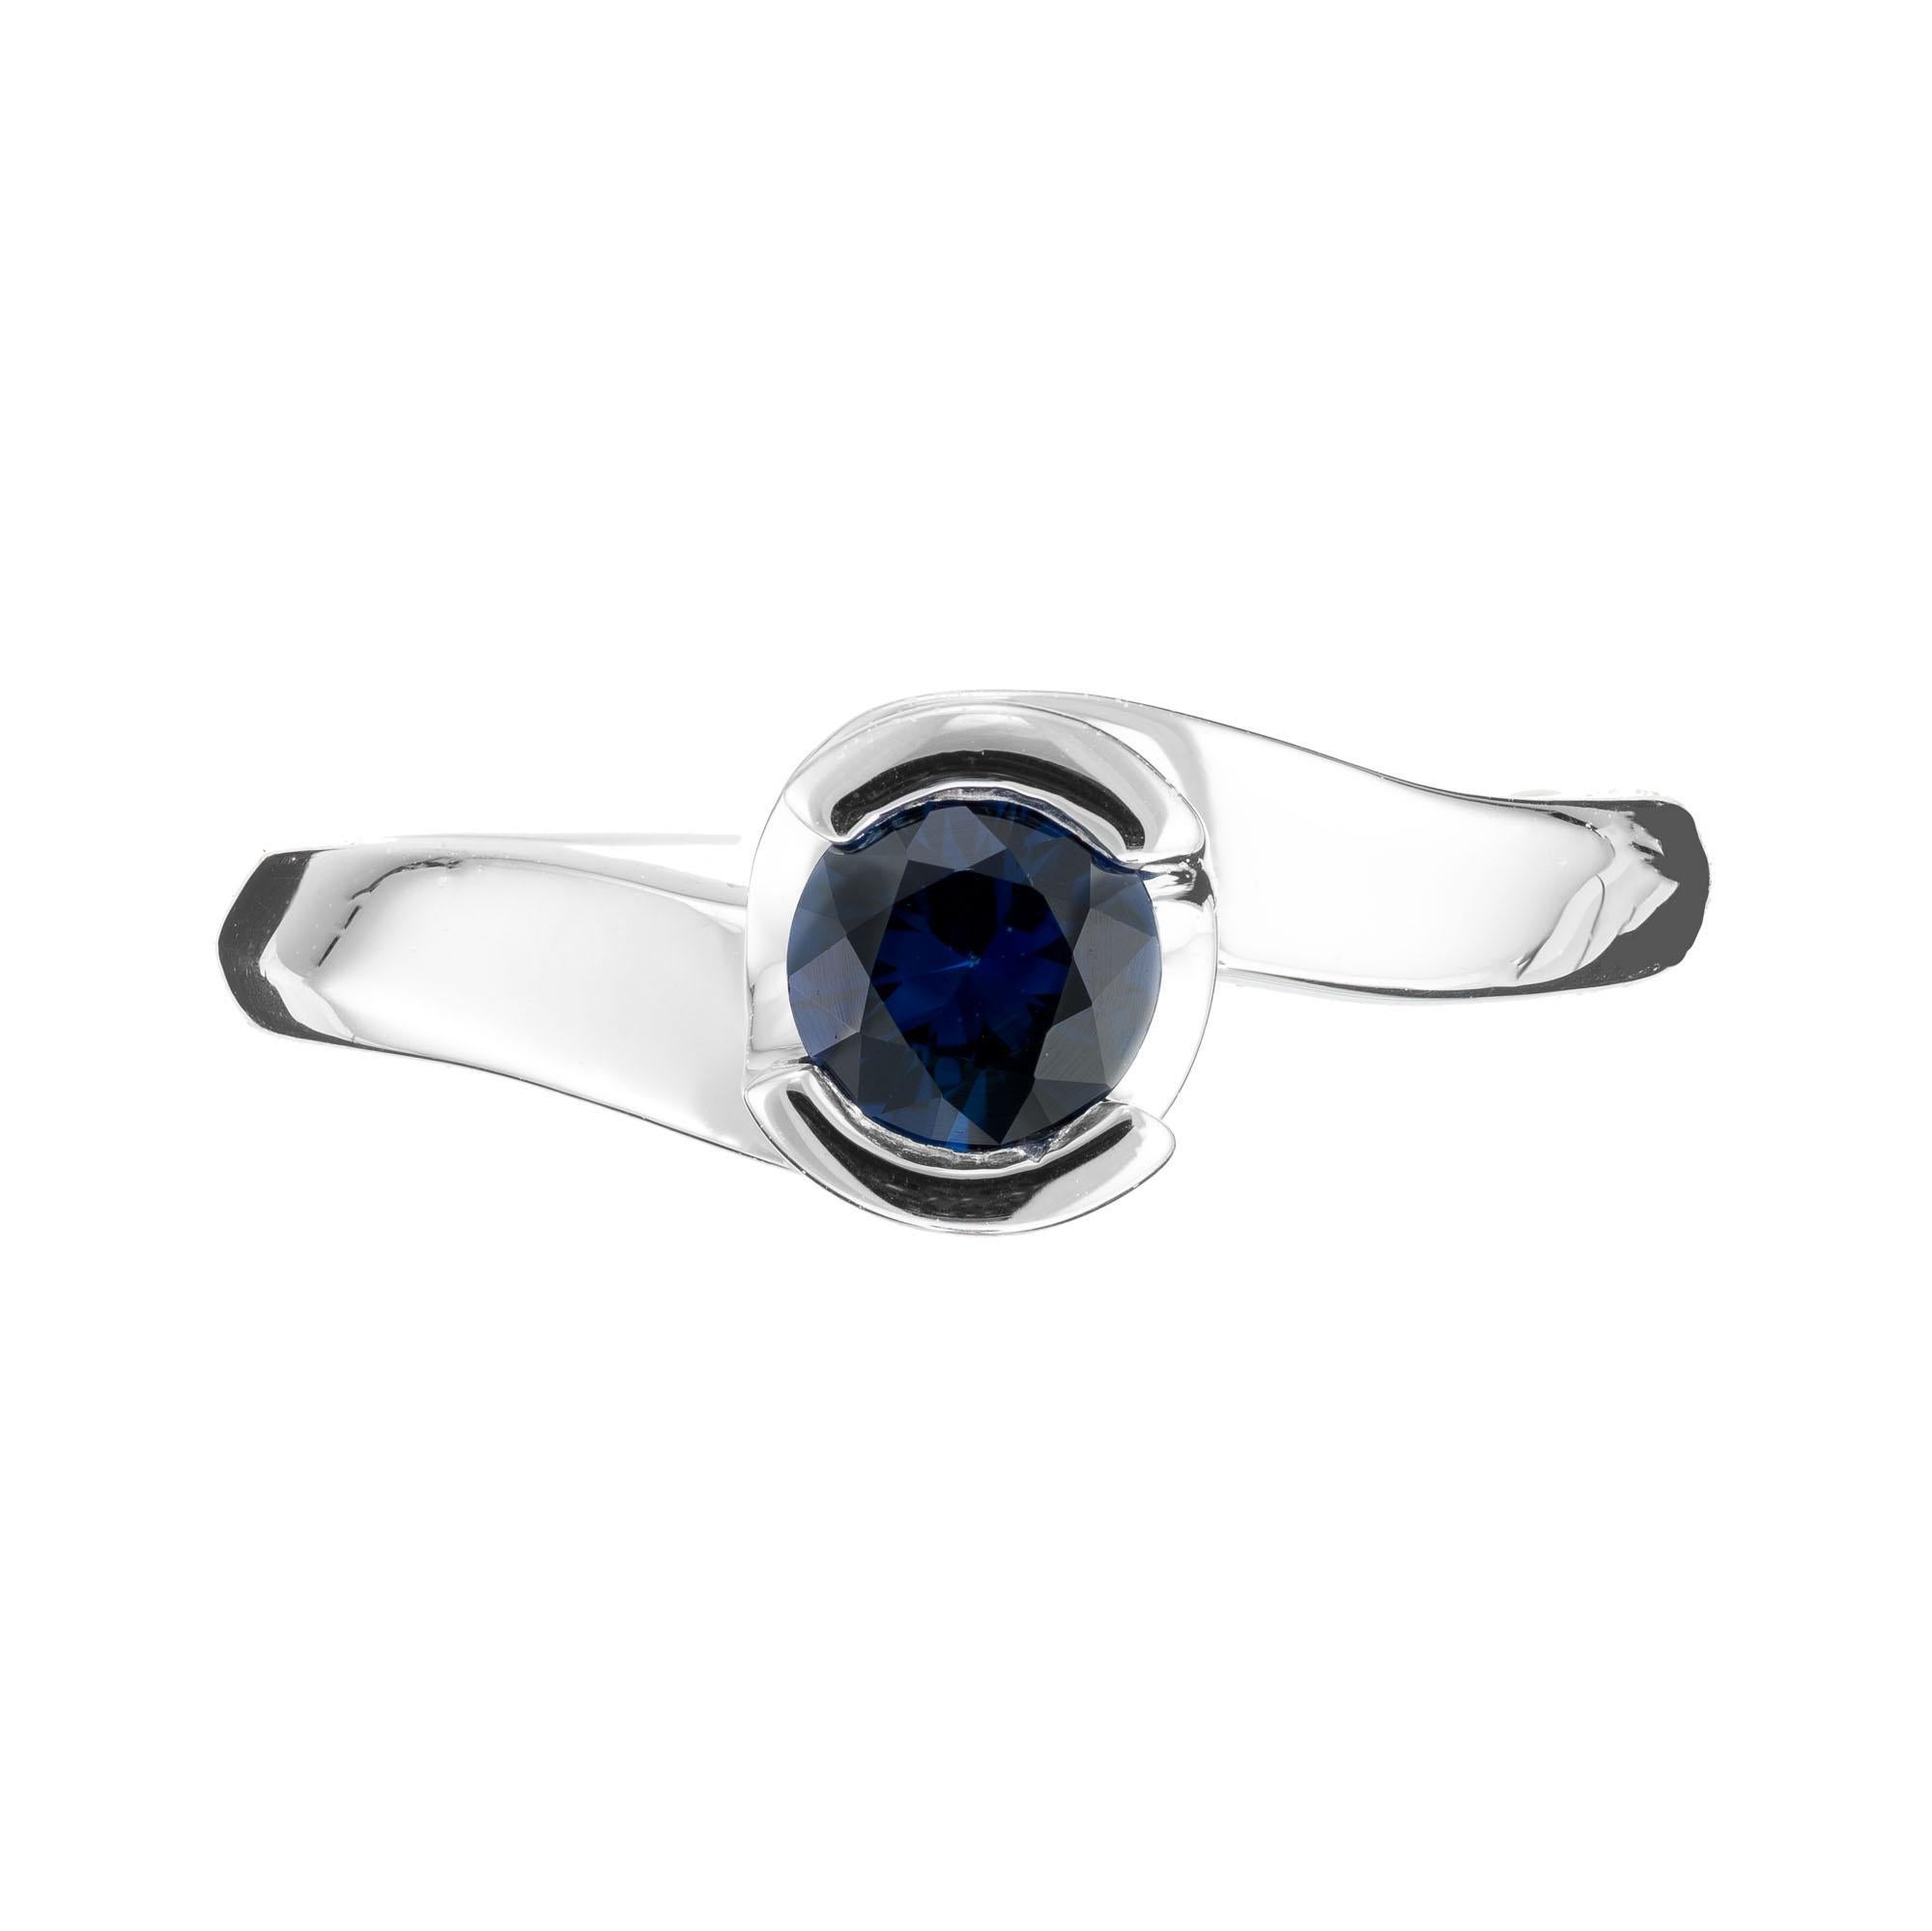 Swirl semi bezel blue sapphire ring in 14k white gold setting.   

1 Blue sapphire, approx. 65cts.  
Size 6.5 and sizeable
14k white gold
Stamped 14k
4.2 grams
